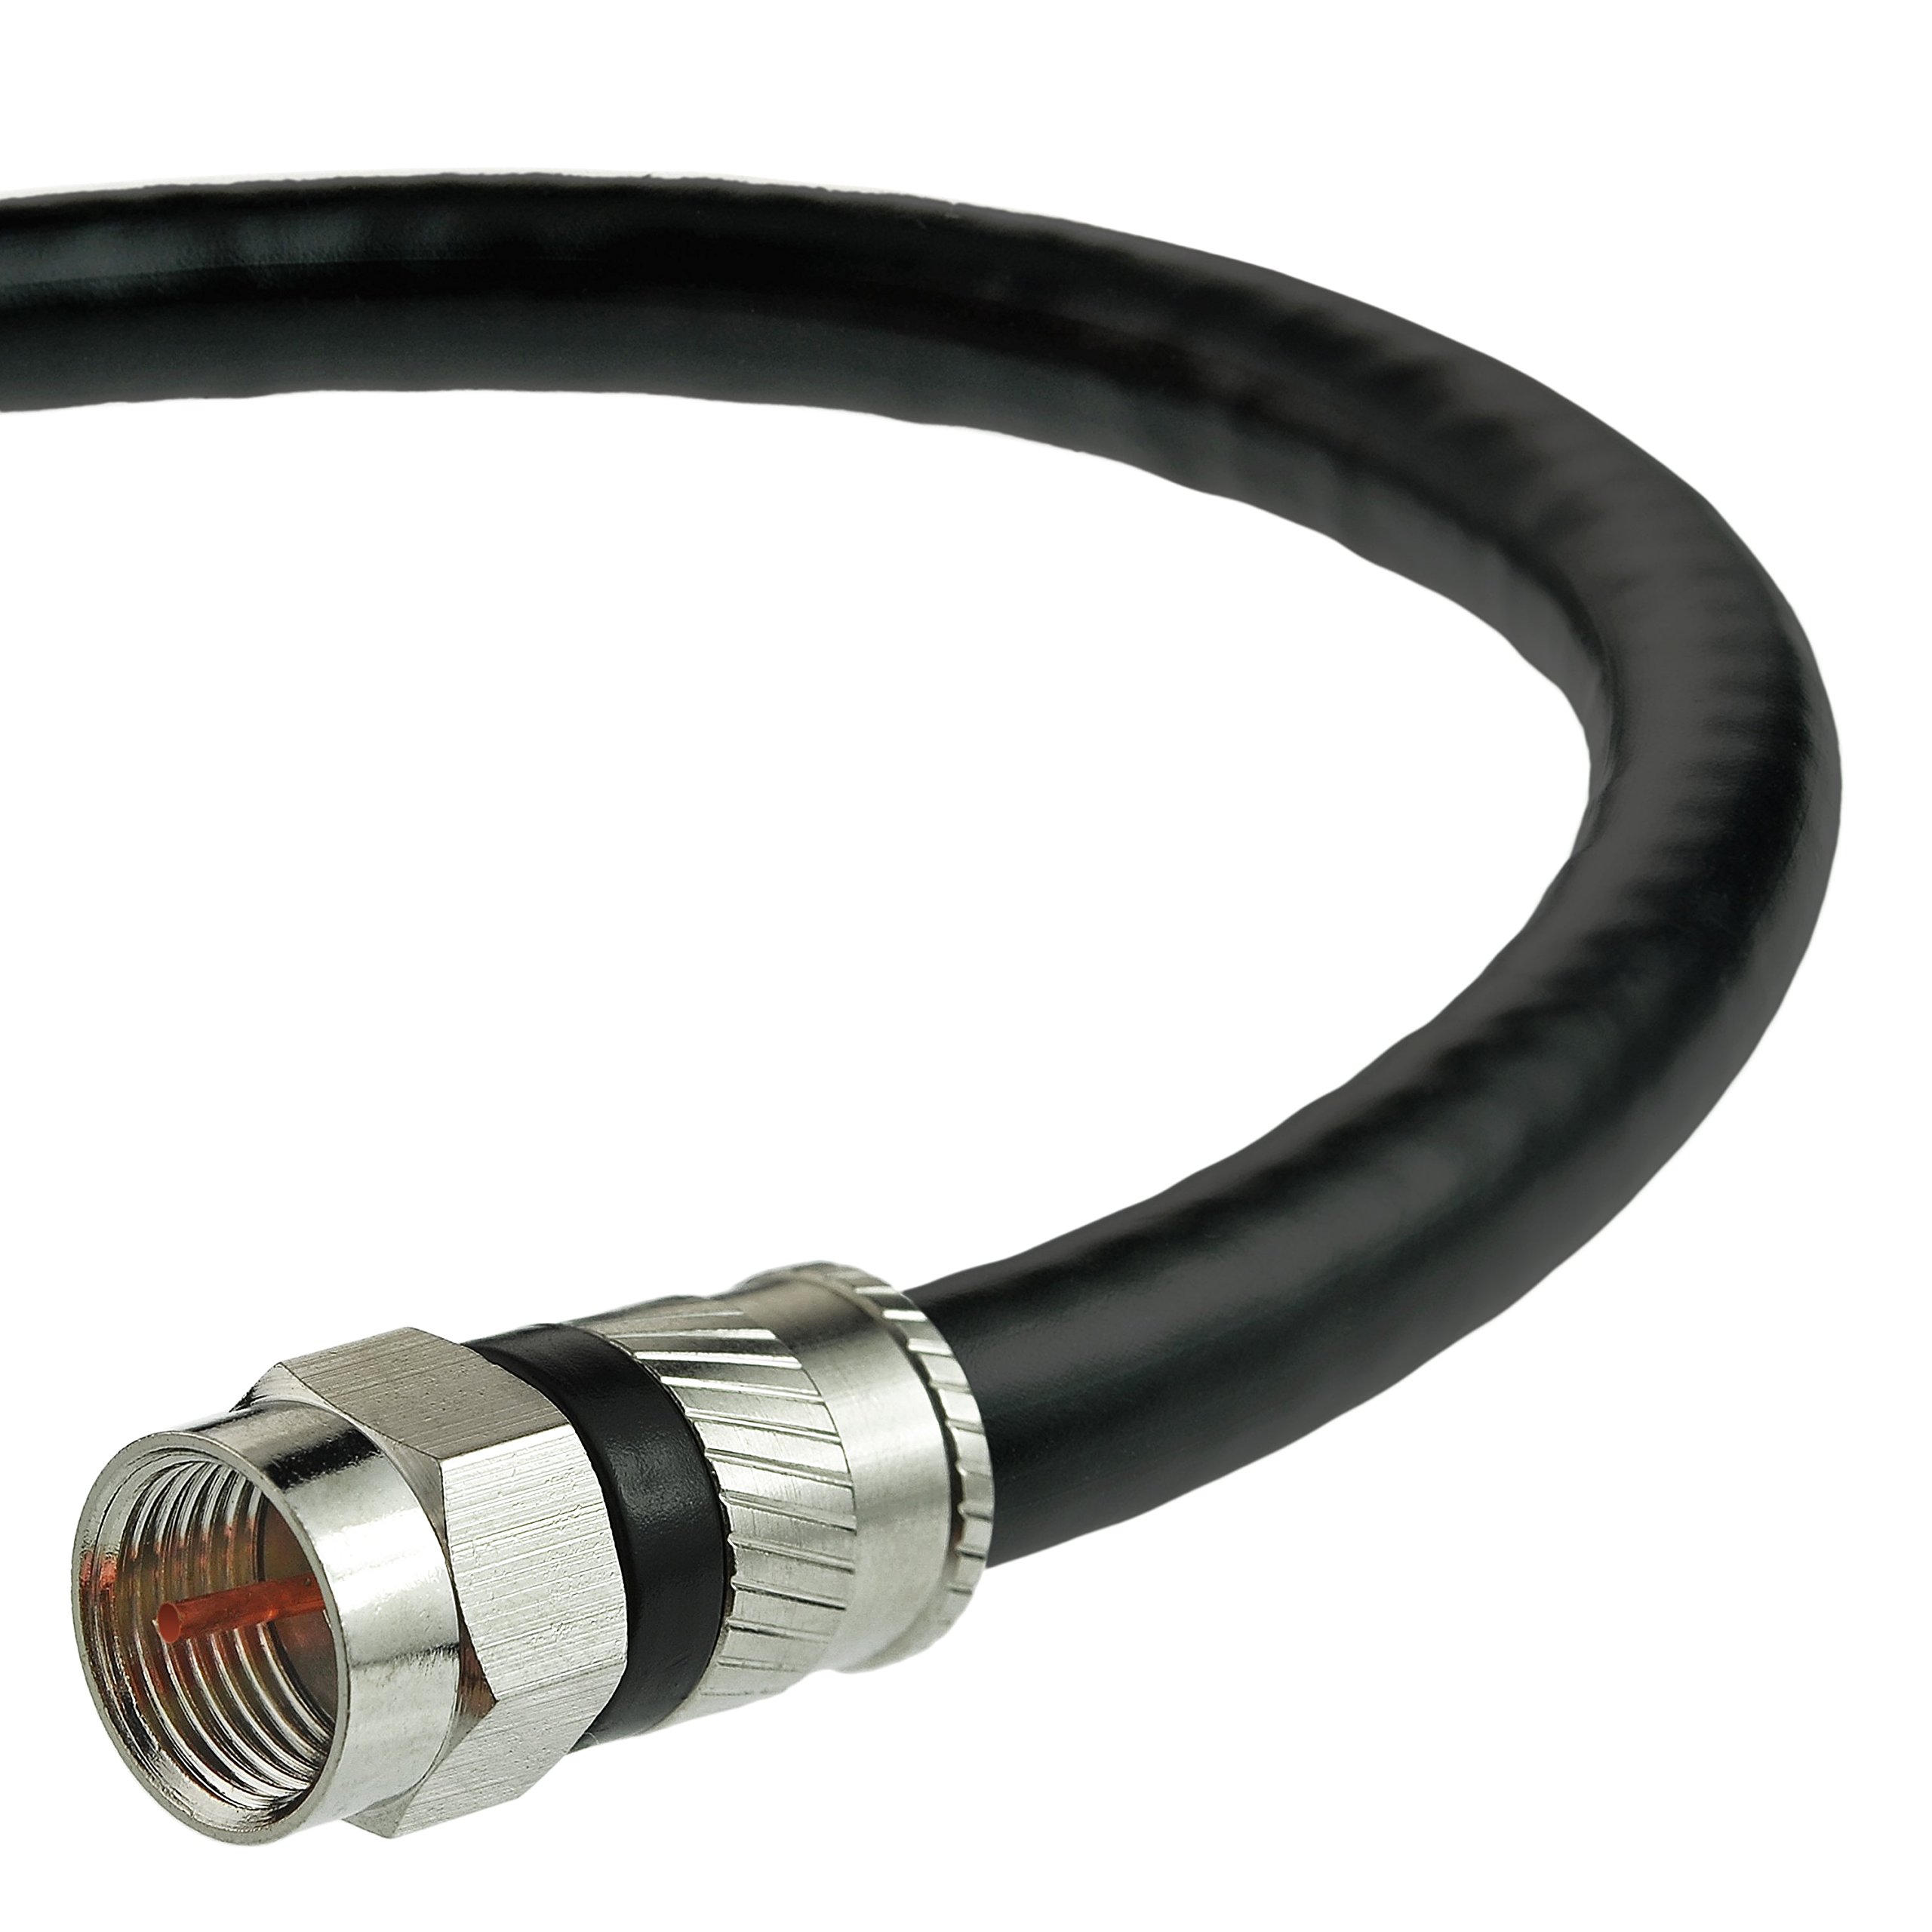 Book Cover Mediabridge™ Coaxial Cable (100 Feet) with F-Male Connectors - Ultra Series - Tri-Shielded UL CL2 in-Wall Rated RG6 Digital Audio/Video - Includes Removable EZ Grip Caps (Part# CJ100-6BF-N1) 100 Feet 100 Feet, Black